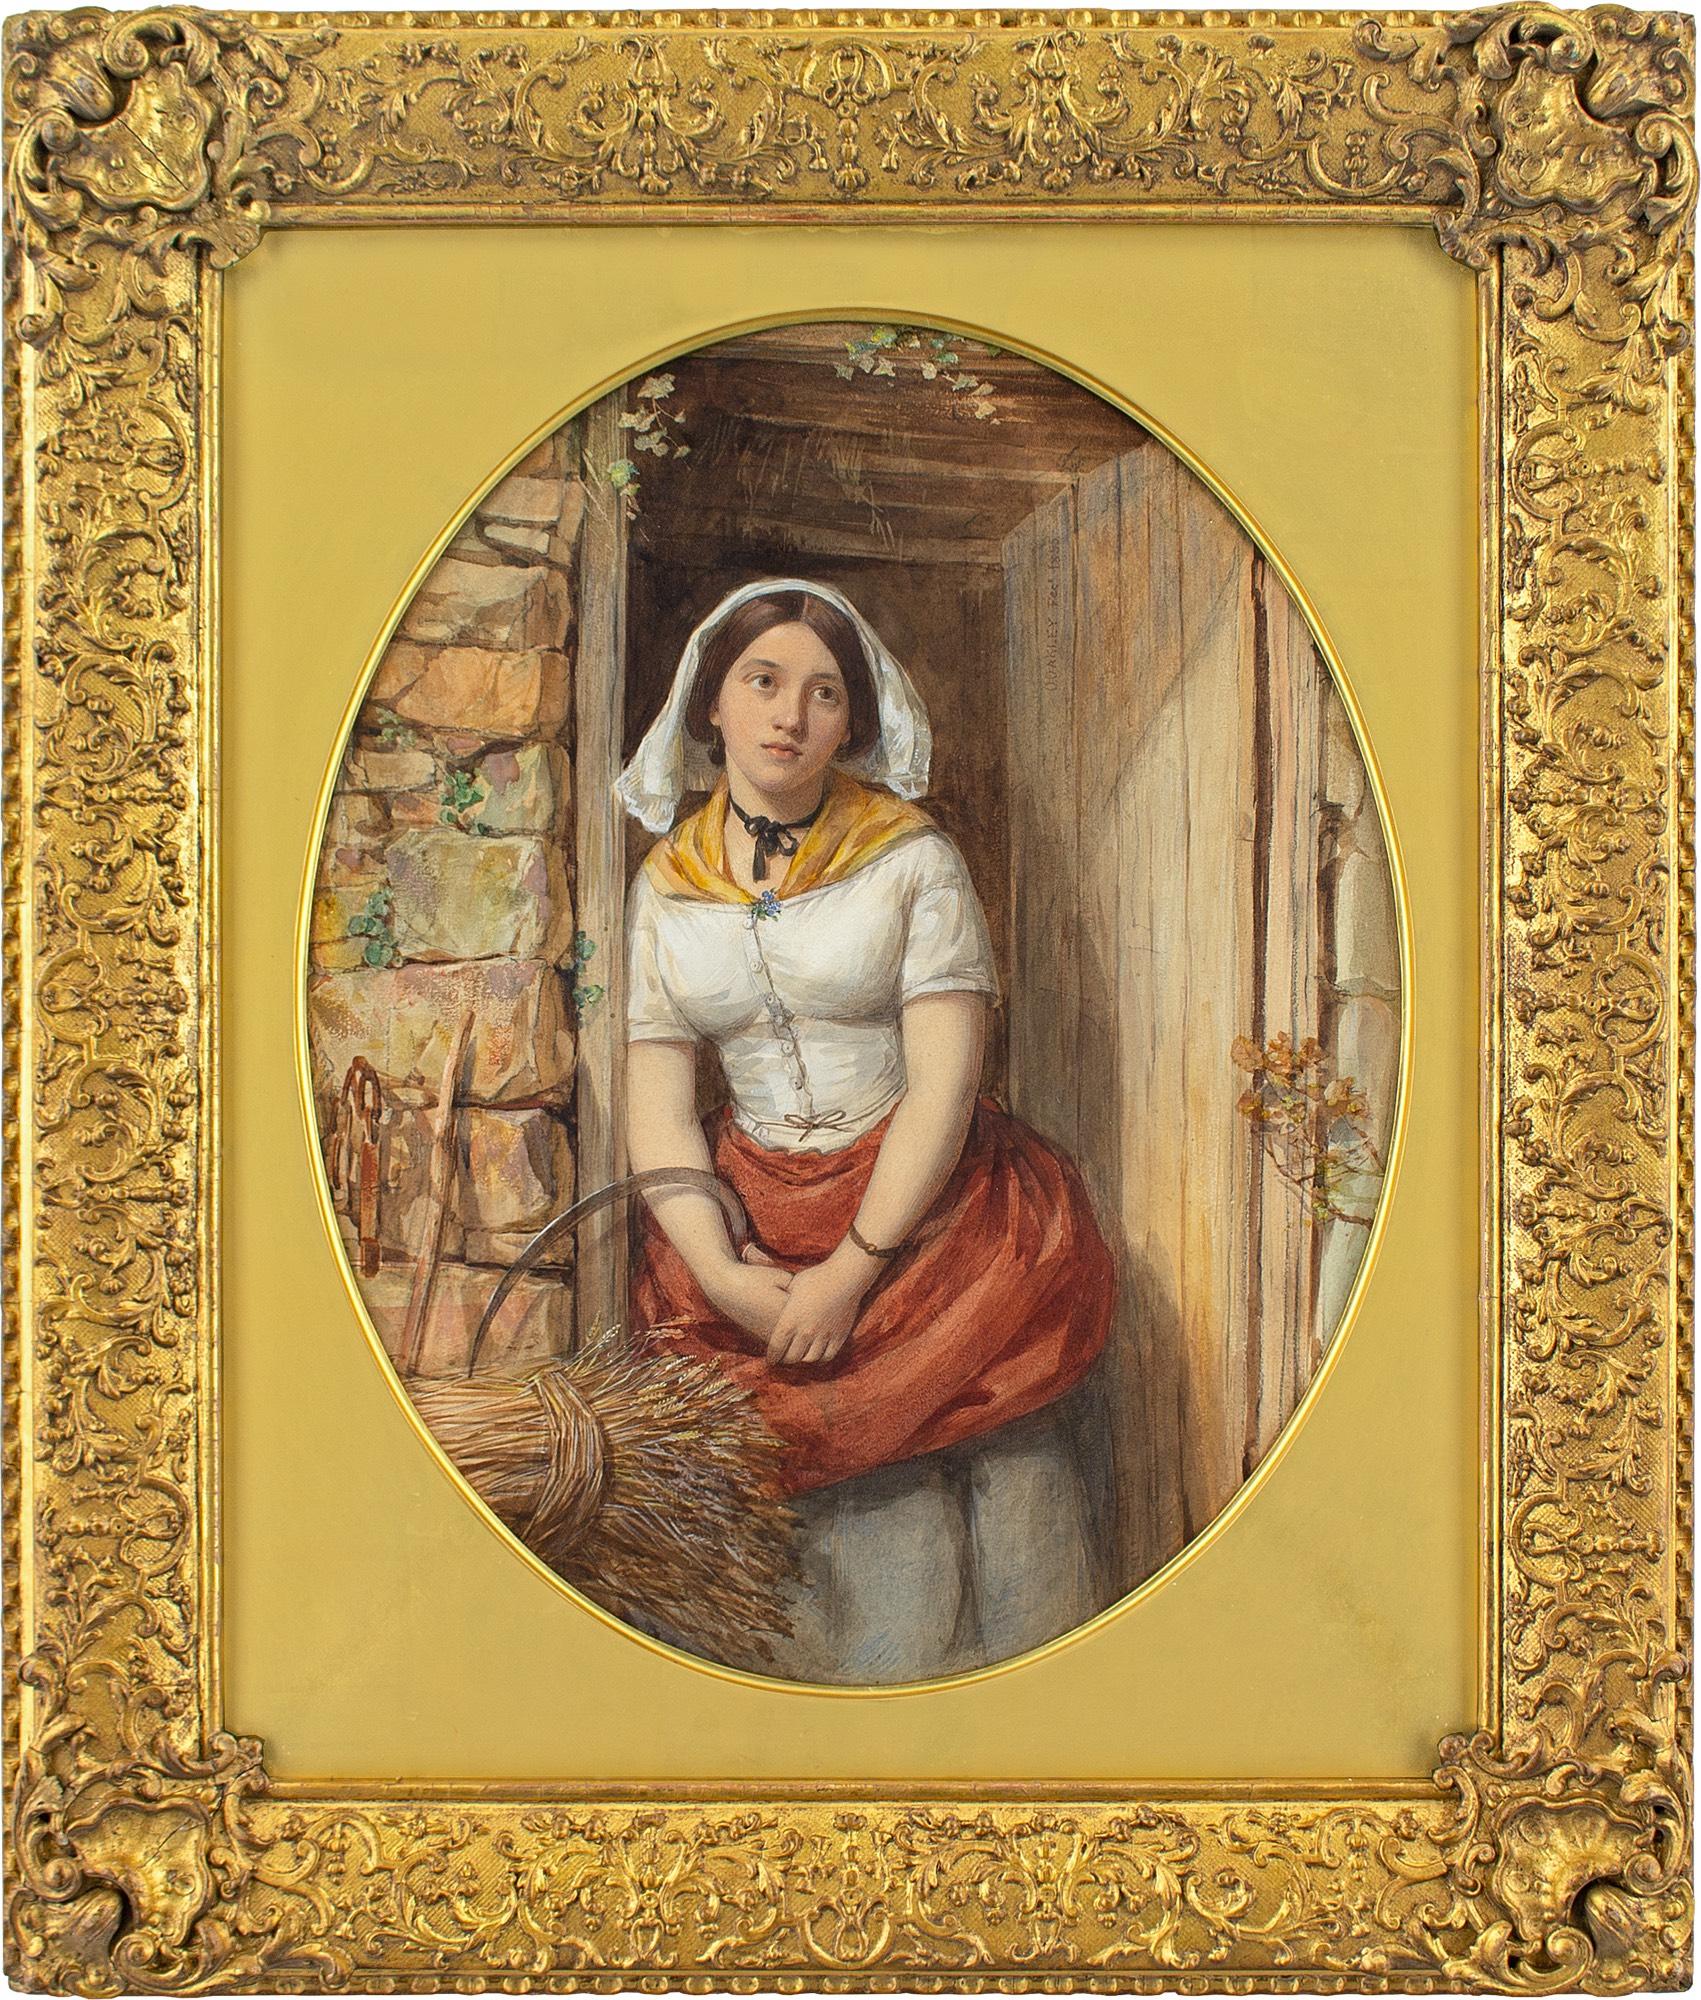 This fine mid-19th-century watercolour by accomplished British artist Octavius Oakley RWS (1800-1867) depicts a harvest girl leaning in a cottage doorway. It was shown at the Academy of Arts, Liverpool, in 1856 and referred to in the Art